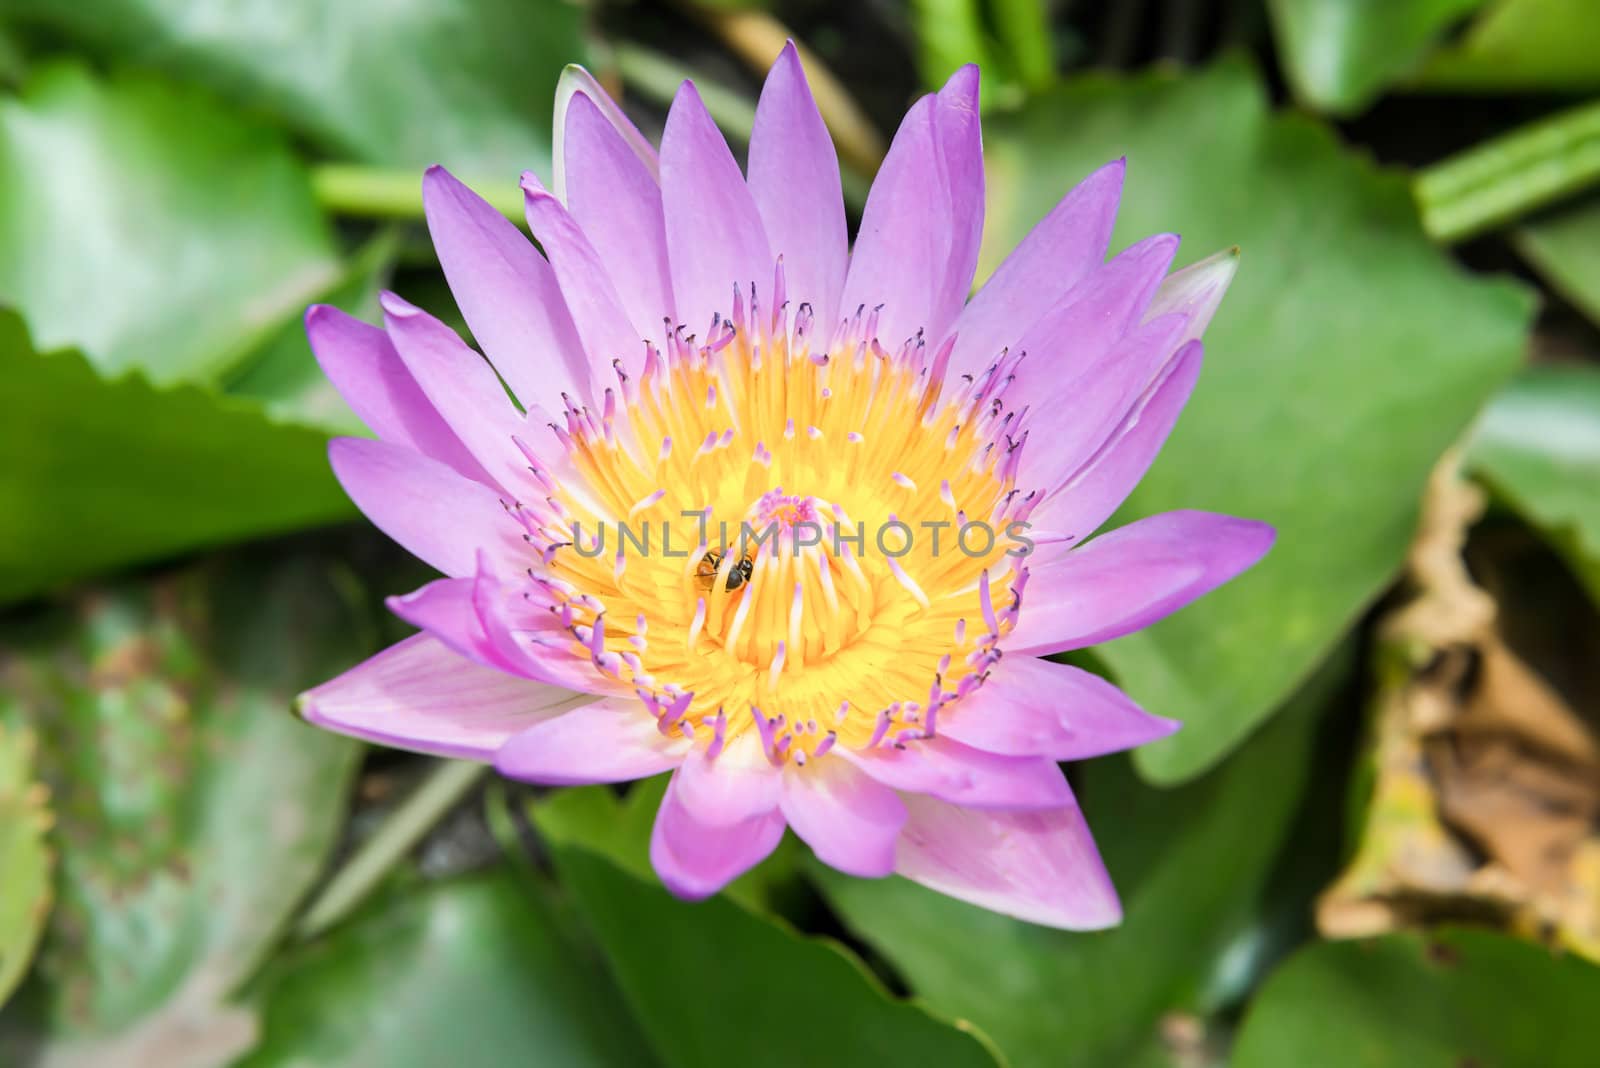 pink lotus or water lily with bee by wmitrmatr